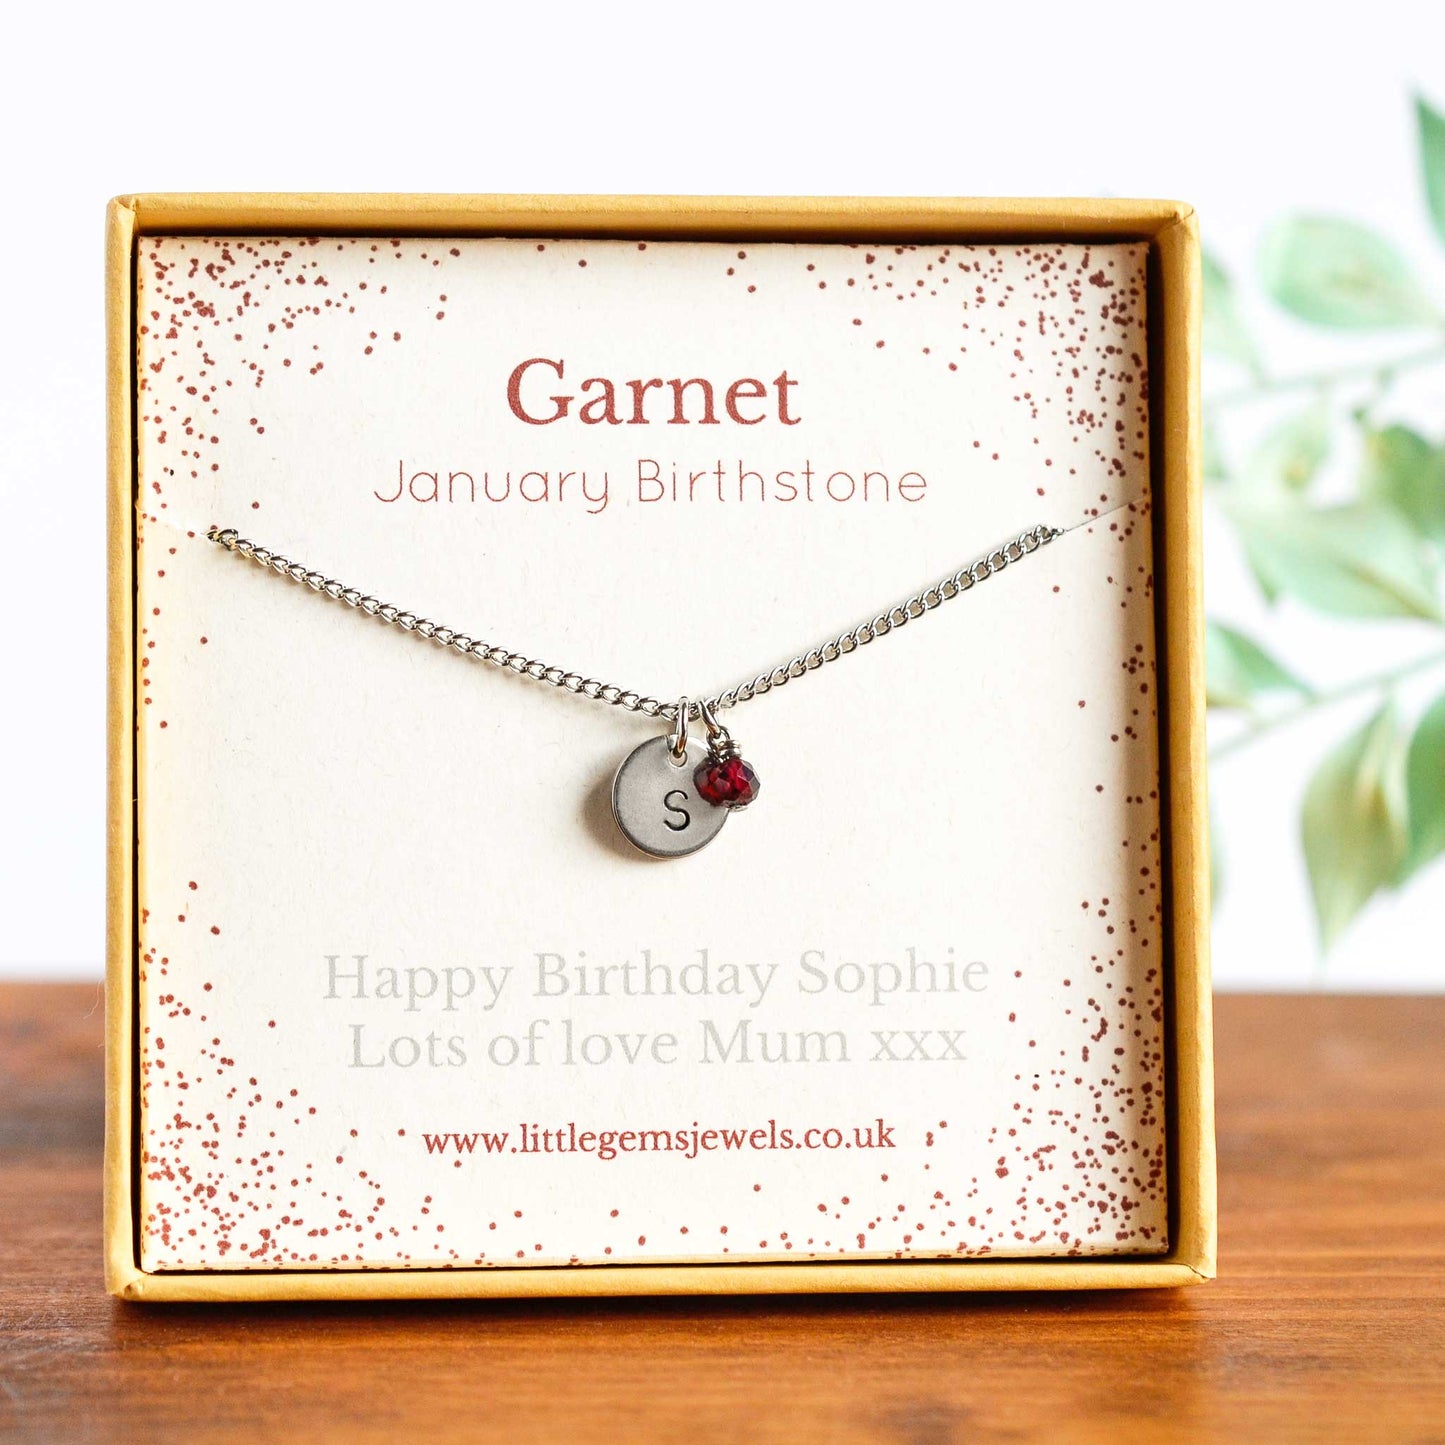 January Birthstone necklace with initial charm & personalised gift message in eco friendly gift box